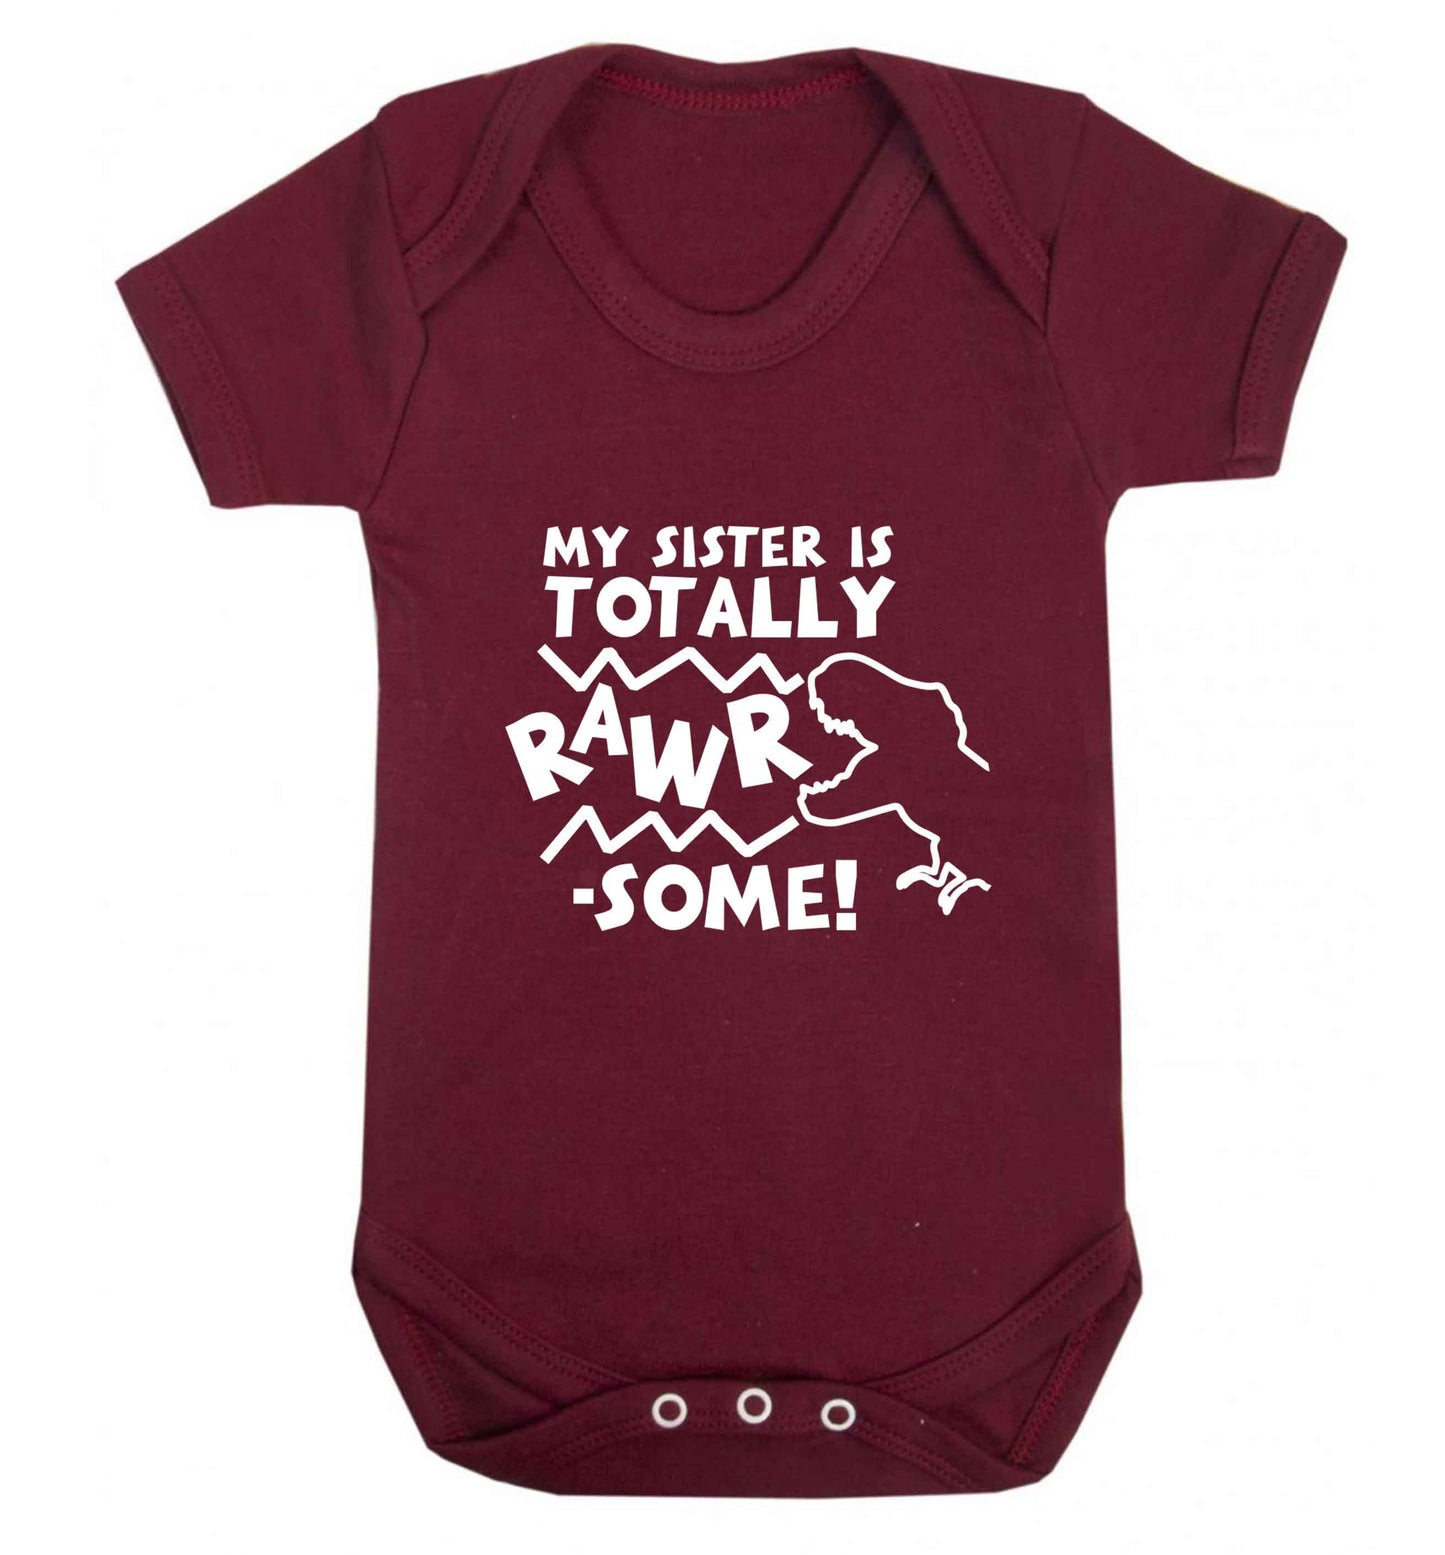 My sister is totally rawrsome baby vest maroon 18-24 months